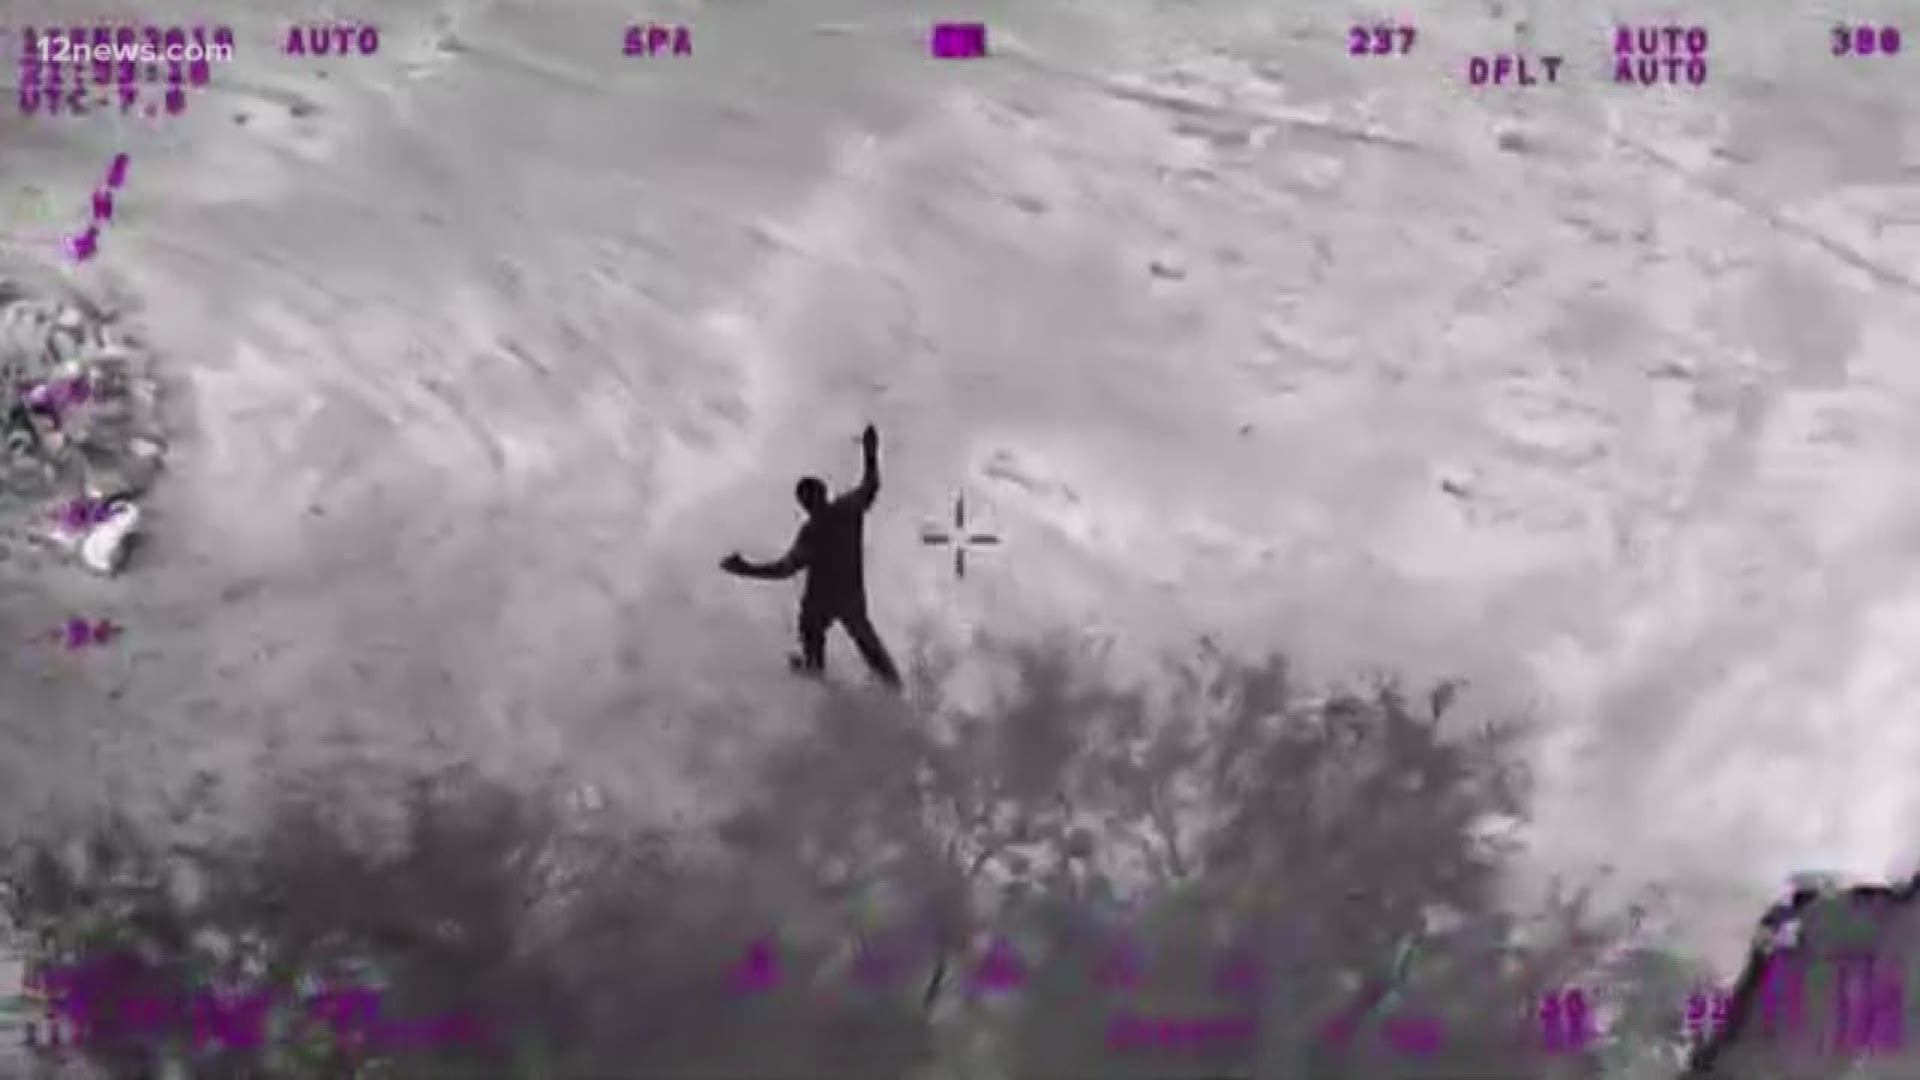 Blane and Susan Barksdale, a fugitive couple wanted for a Tucson man's murder, were captured in Tonto Basin, AZ Wednesday night and an Arizona DPS helicopter captured the whole thing on video. Here's a breakdown of what happened.